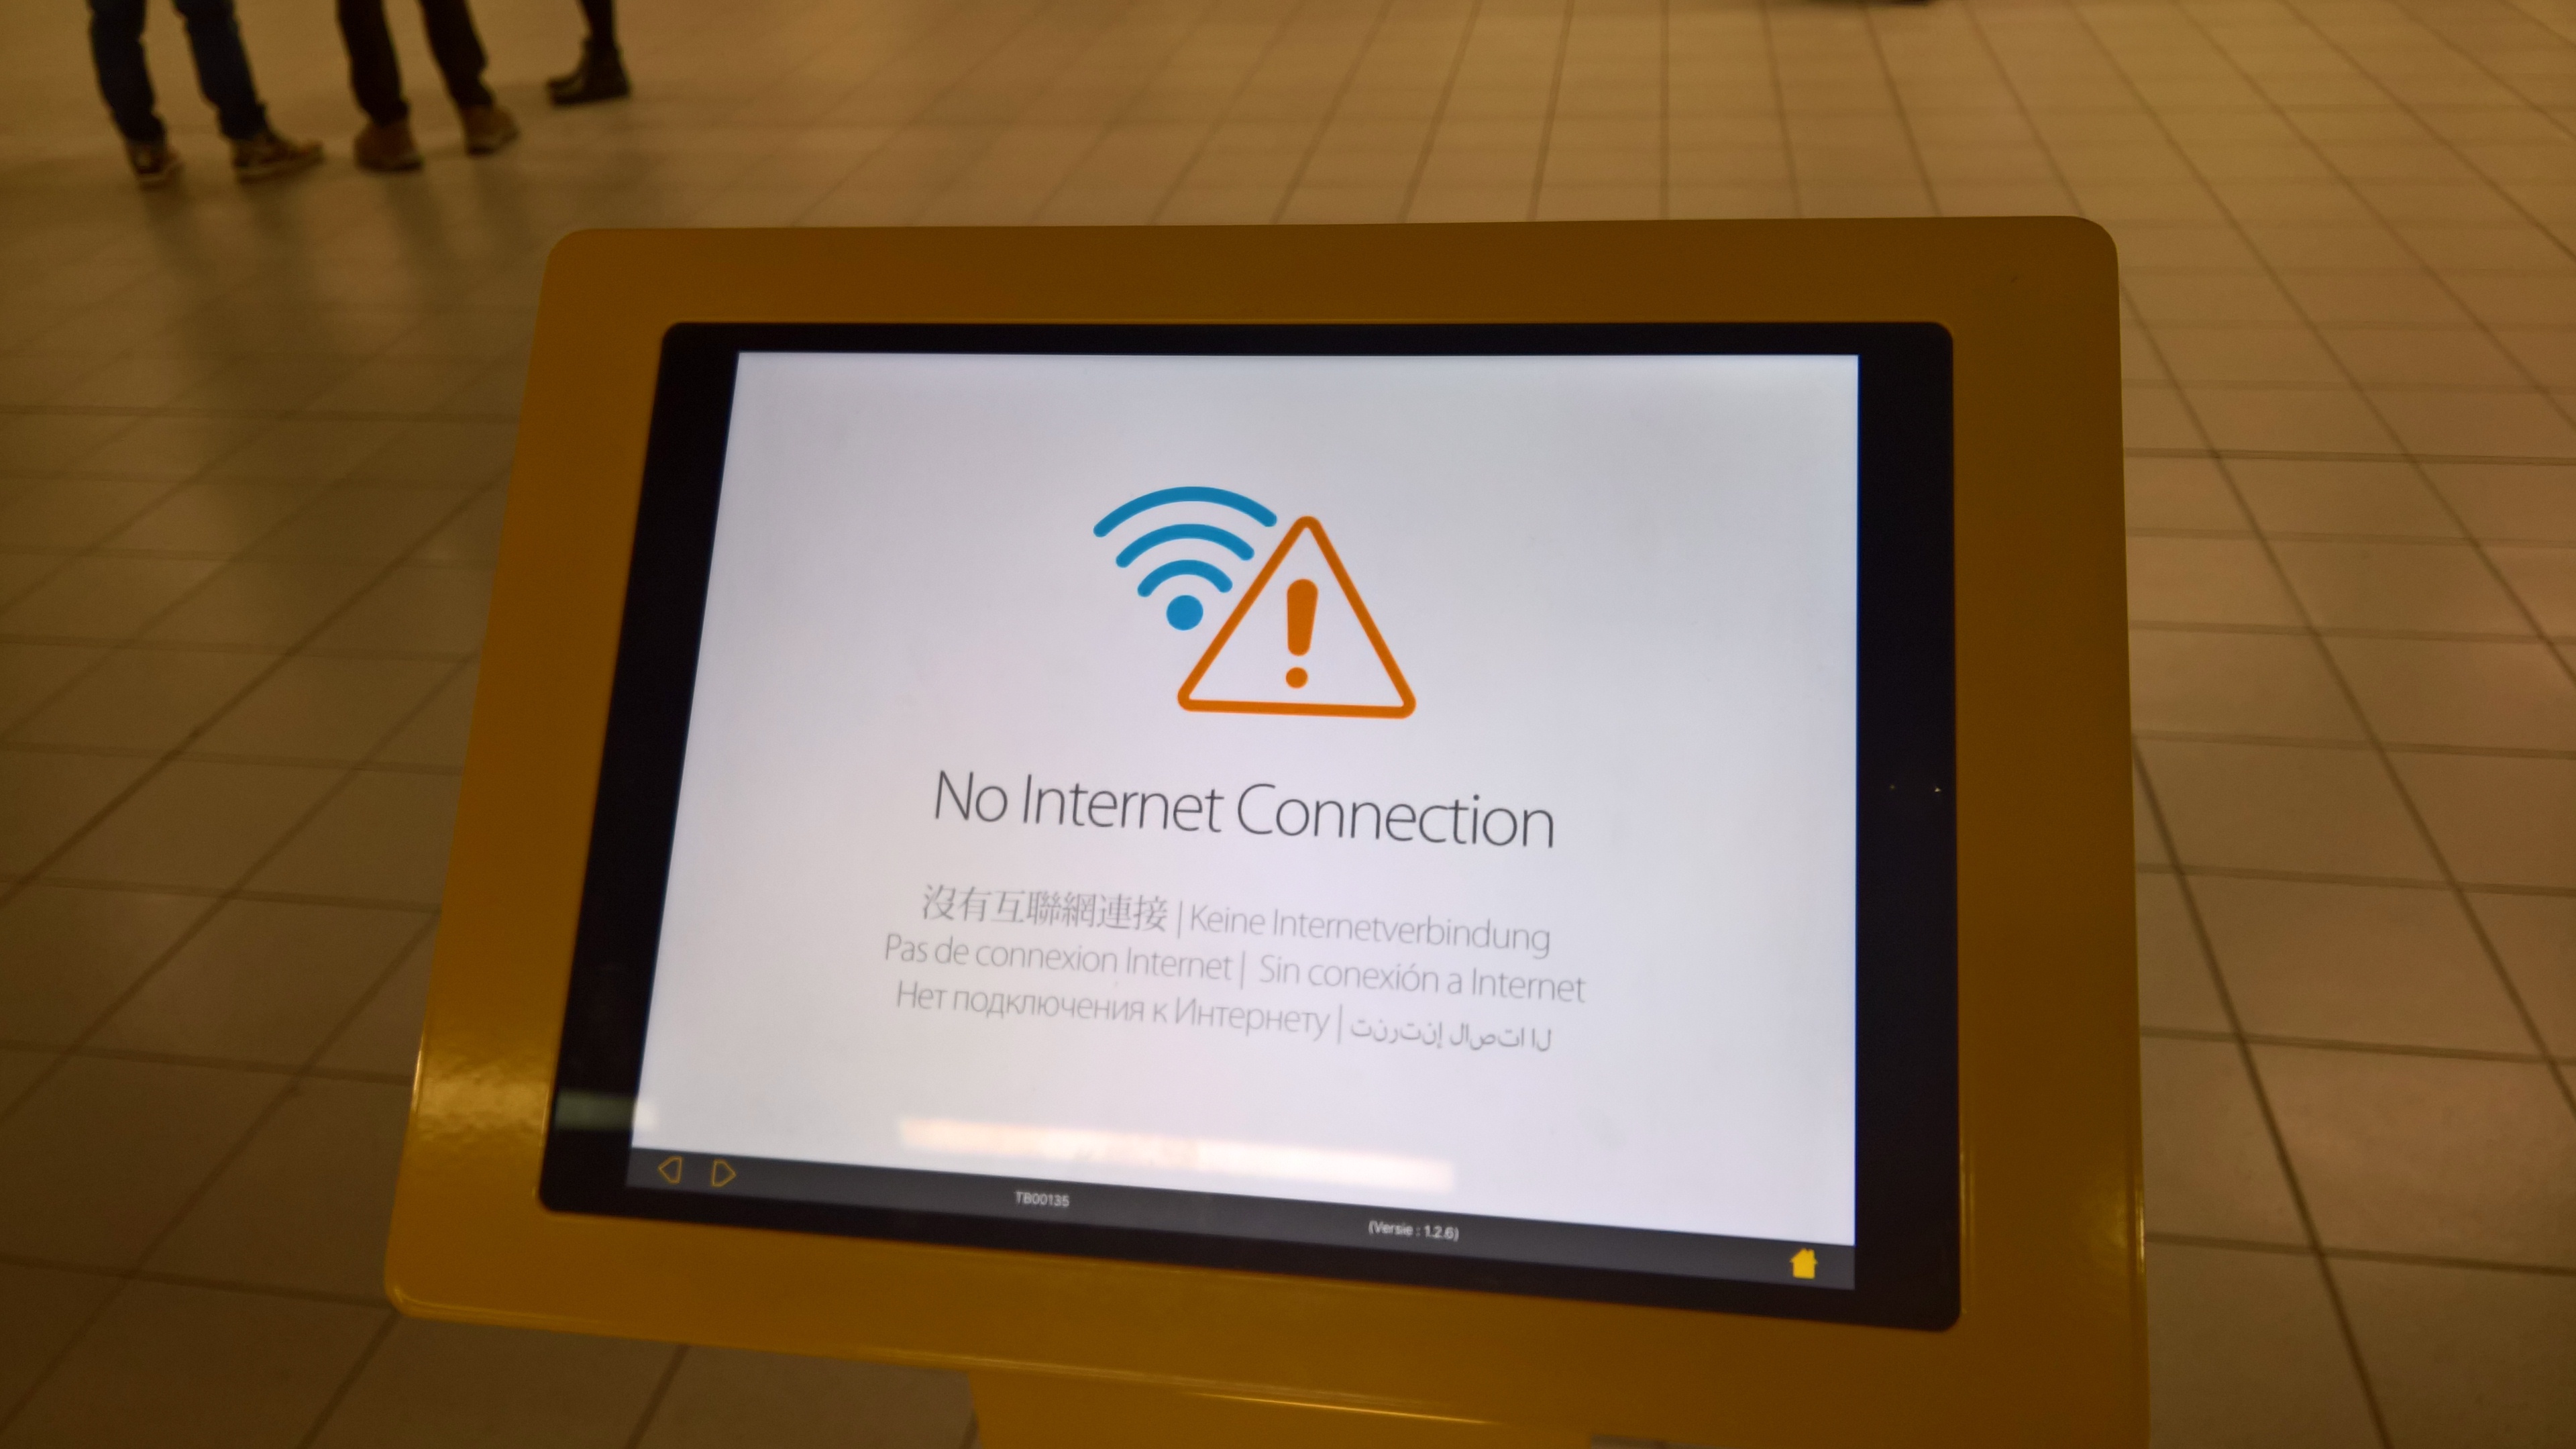 A computer screen with an Offline or No Internet Connection message.